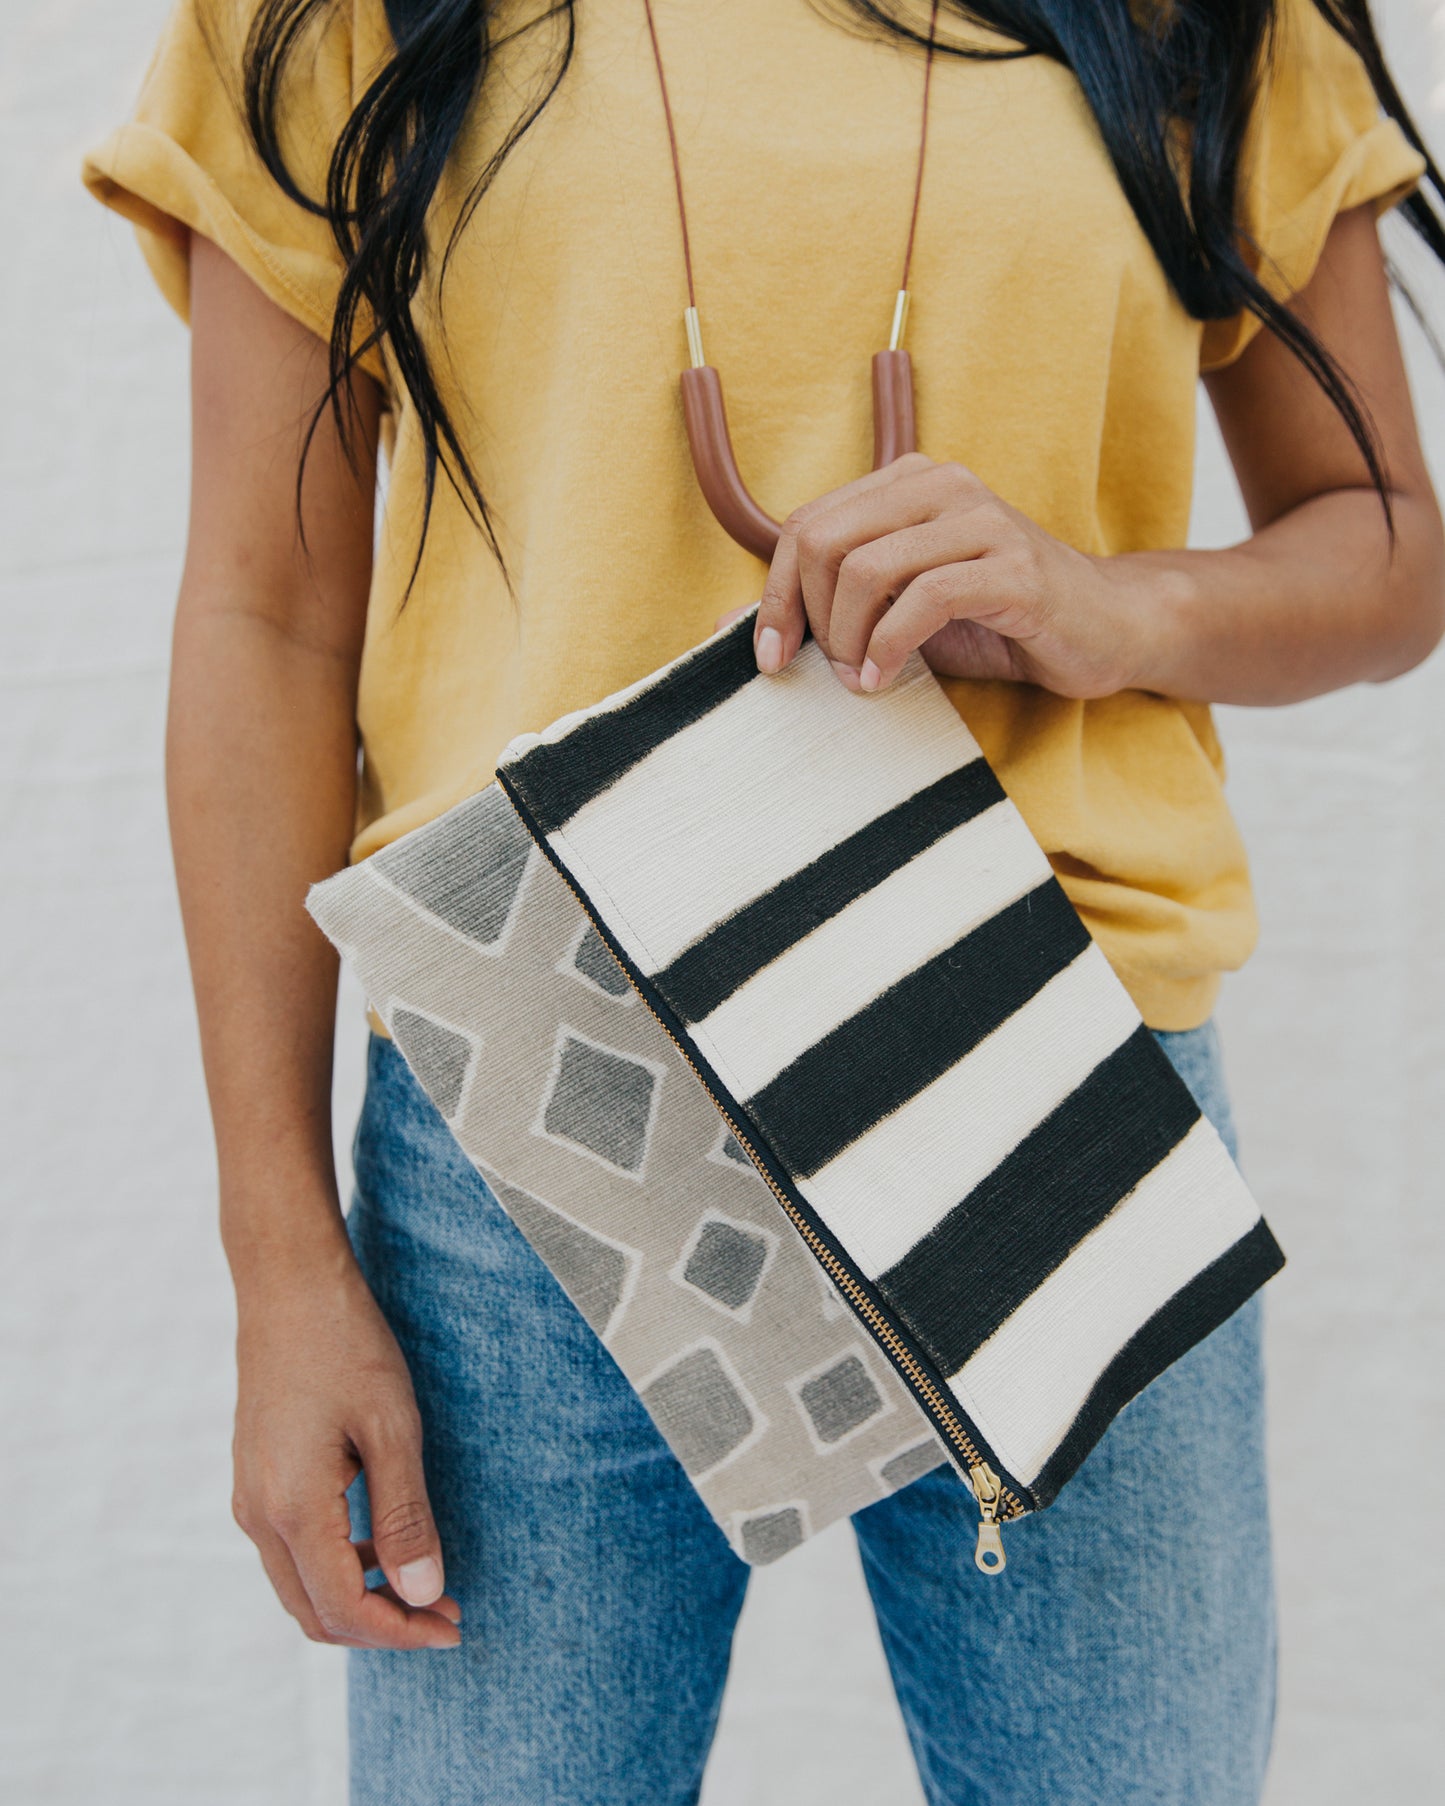 Handmade foldover/reversible clutch featuring fair trade textiles naturally-dyed by artisans from Mali. Each clutch is lined with 100% organic cotton. Sewn by our resettled refugee artisan, Lashta, locally in San Diego.